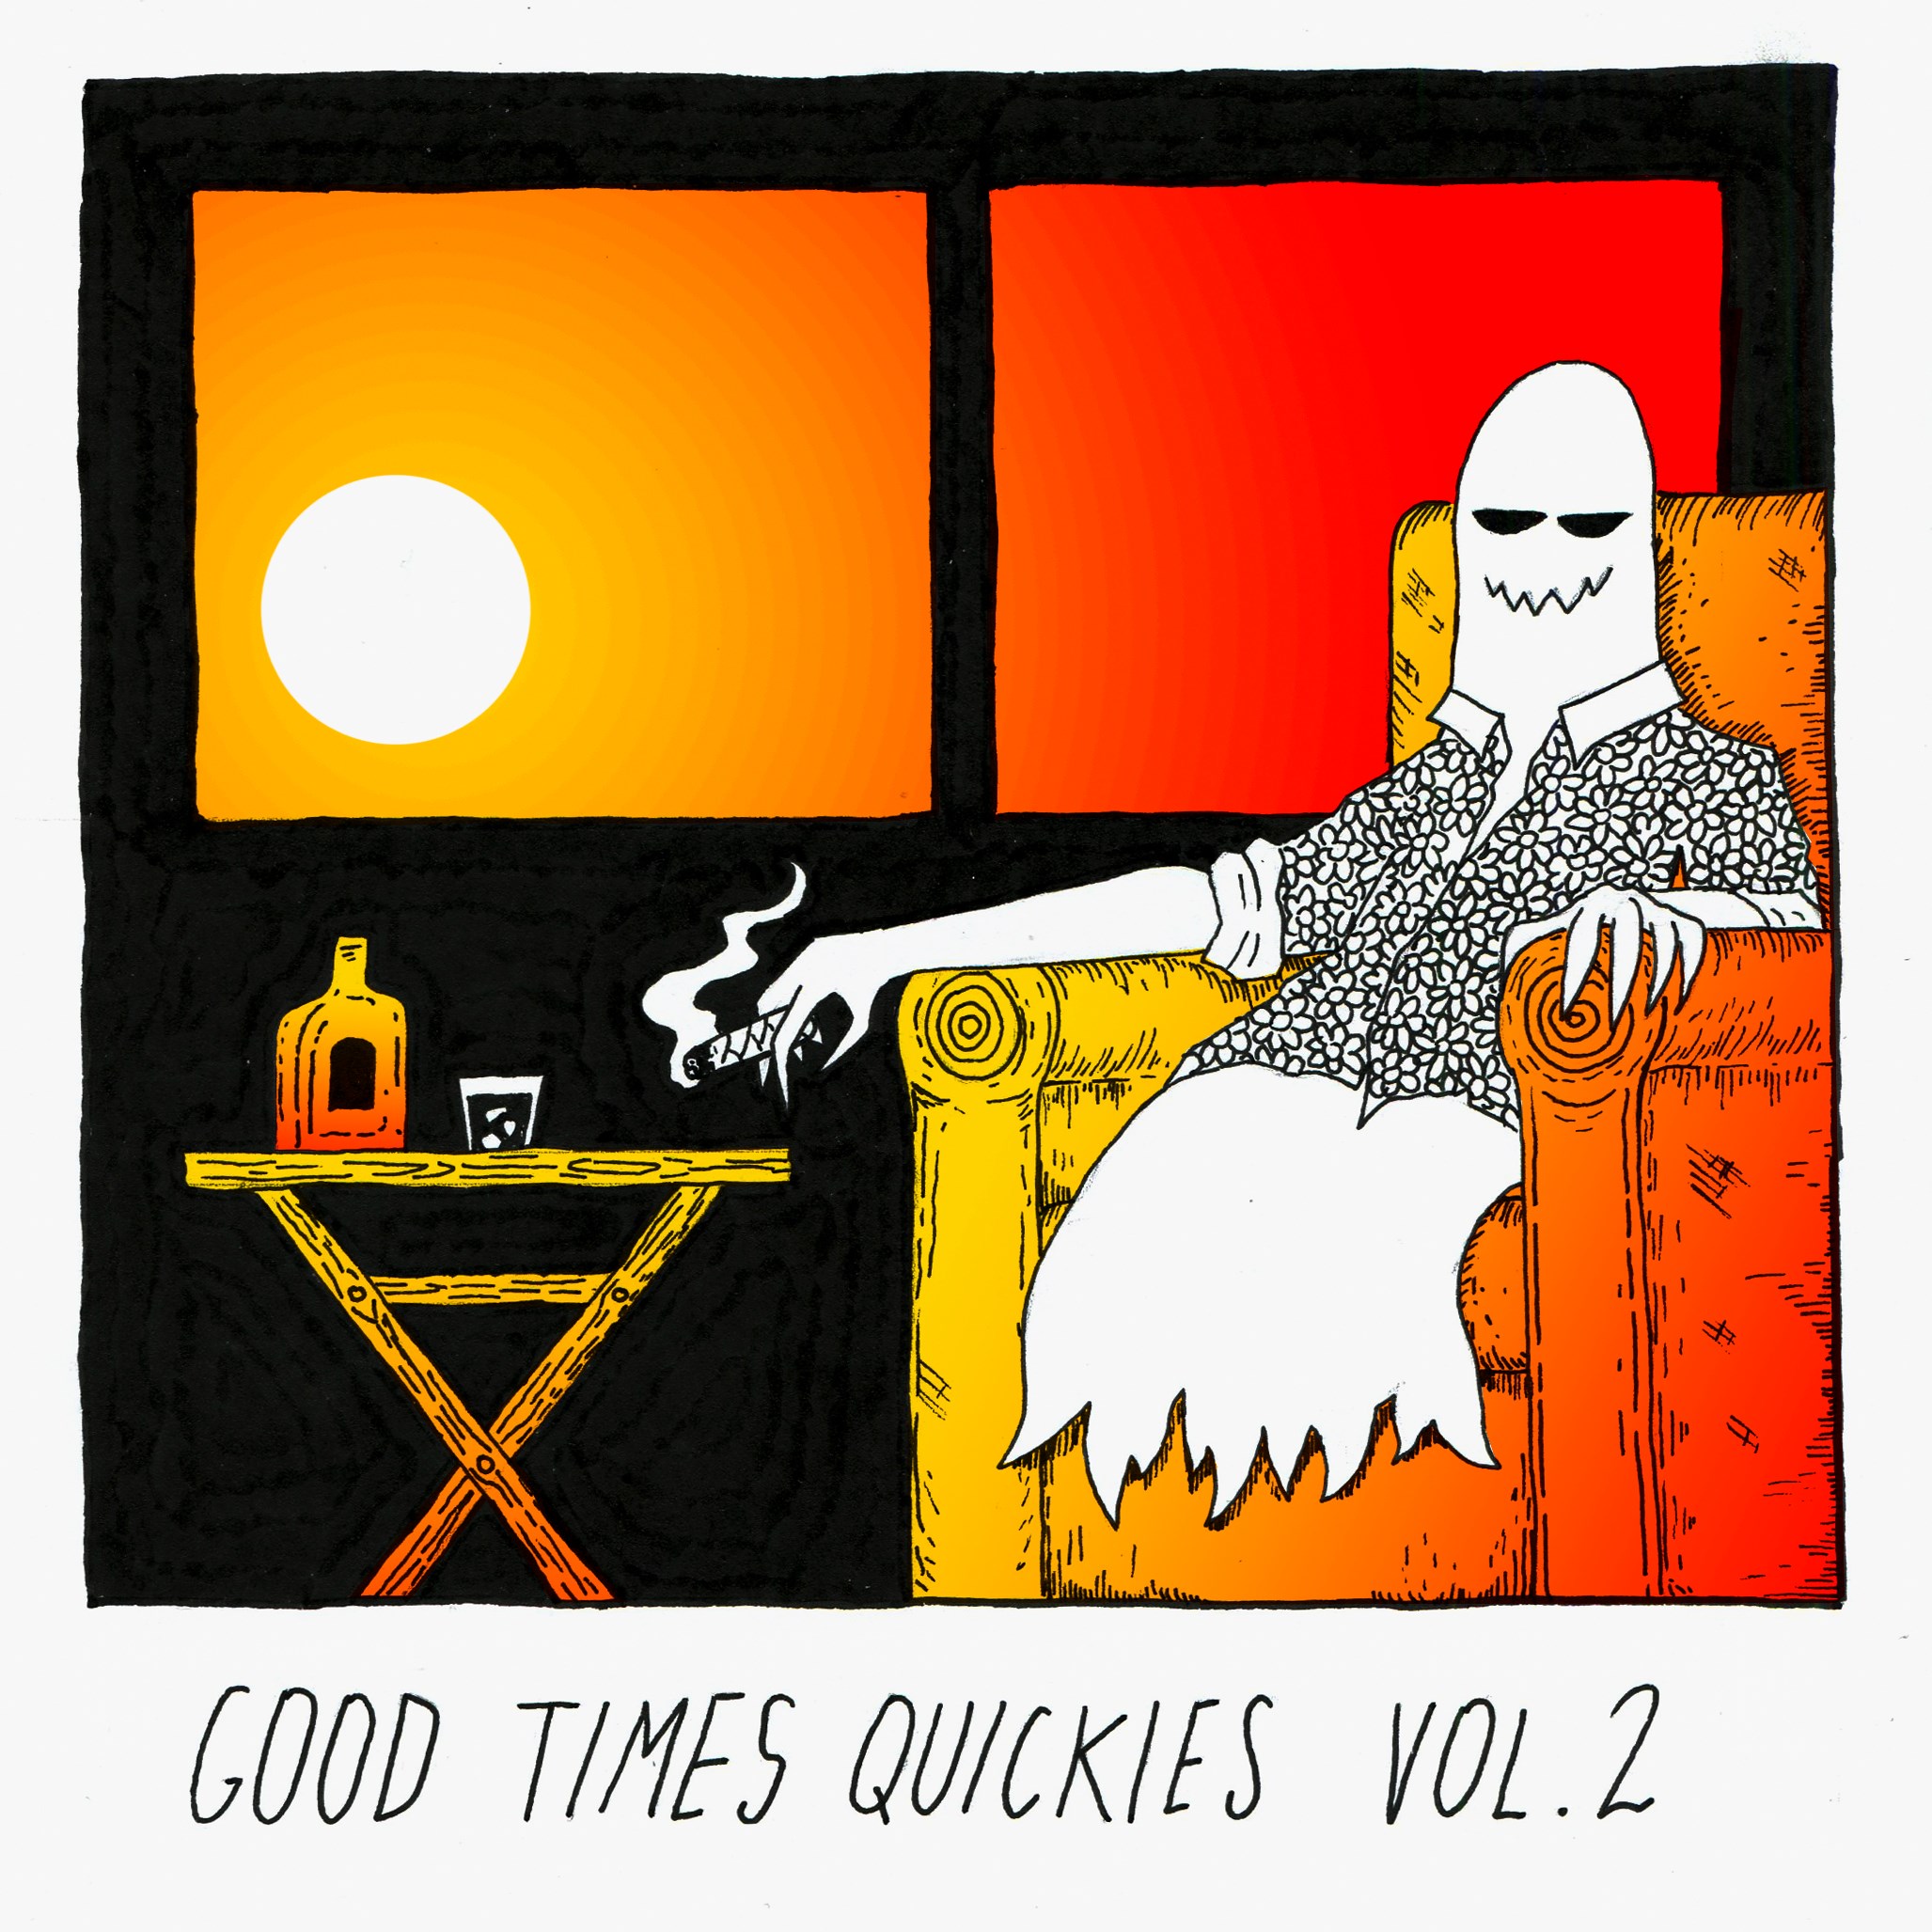 Good Times Quickies